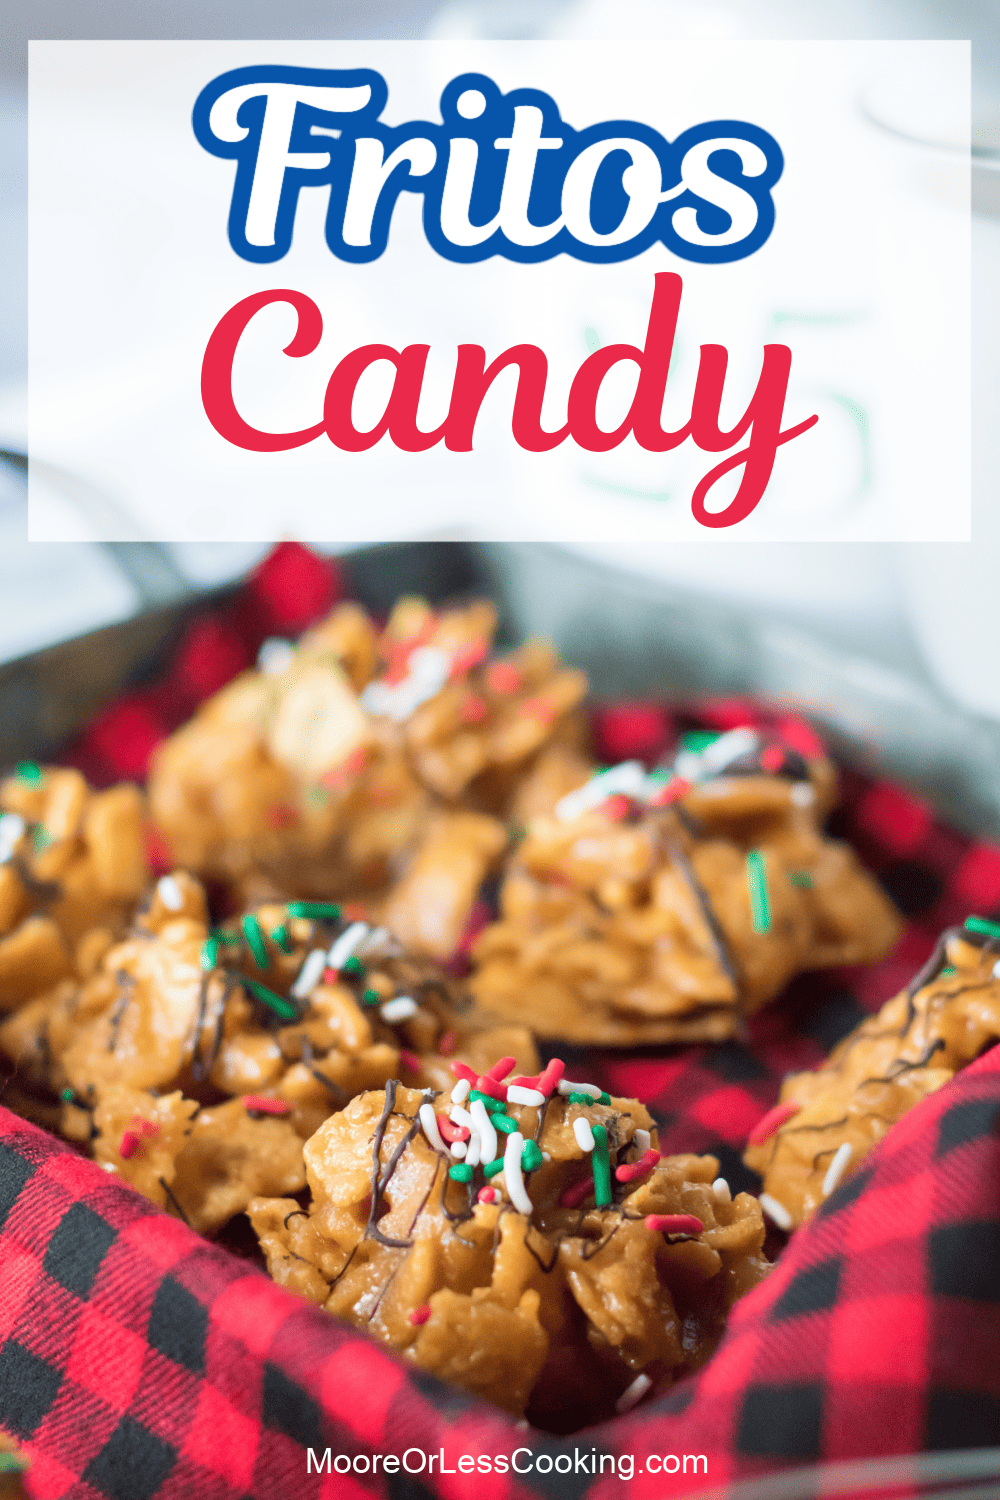 These Frito Candies are like no other! You make a quick little caramel peanut butter base that is creamy and gooey without being sticky. It pairs perfectly with the salty, crunch Fritos creating a candy that has everything you could want. A drizzle of chocolate adds a little richness. via @Mooreorlesscook